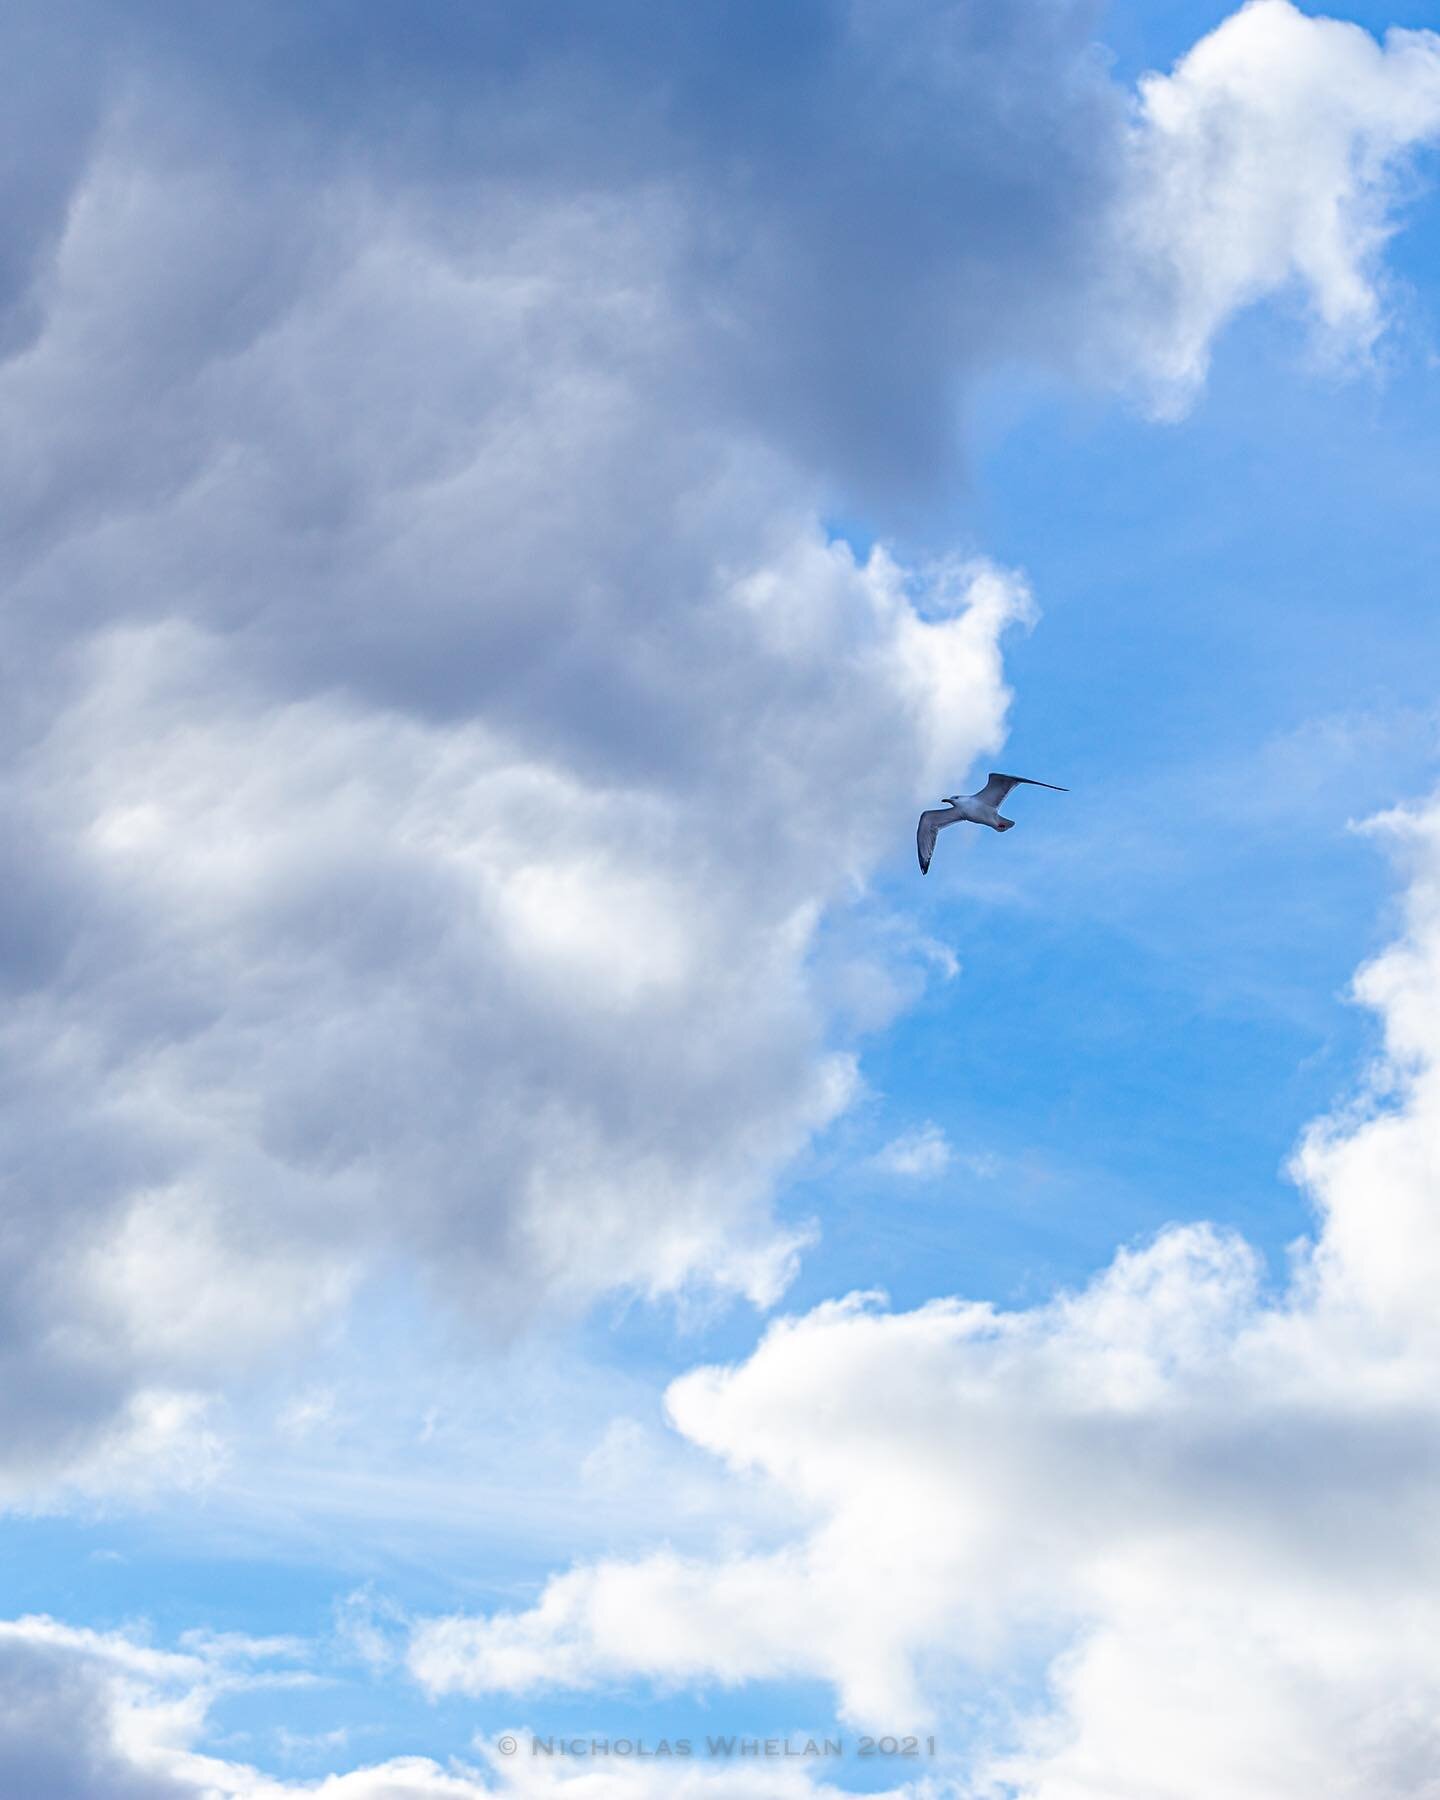 A Beast from the East - stunning clouds over a freezing cold seafront today #seagull #bray #brayseafront #braypromenade #seabirds #birdphotography #clouds #cloudscape #cloudporn #cloudlovers  #cloud9 #blueskies #bleu #blueandwhite #canon6d #tamron702